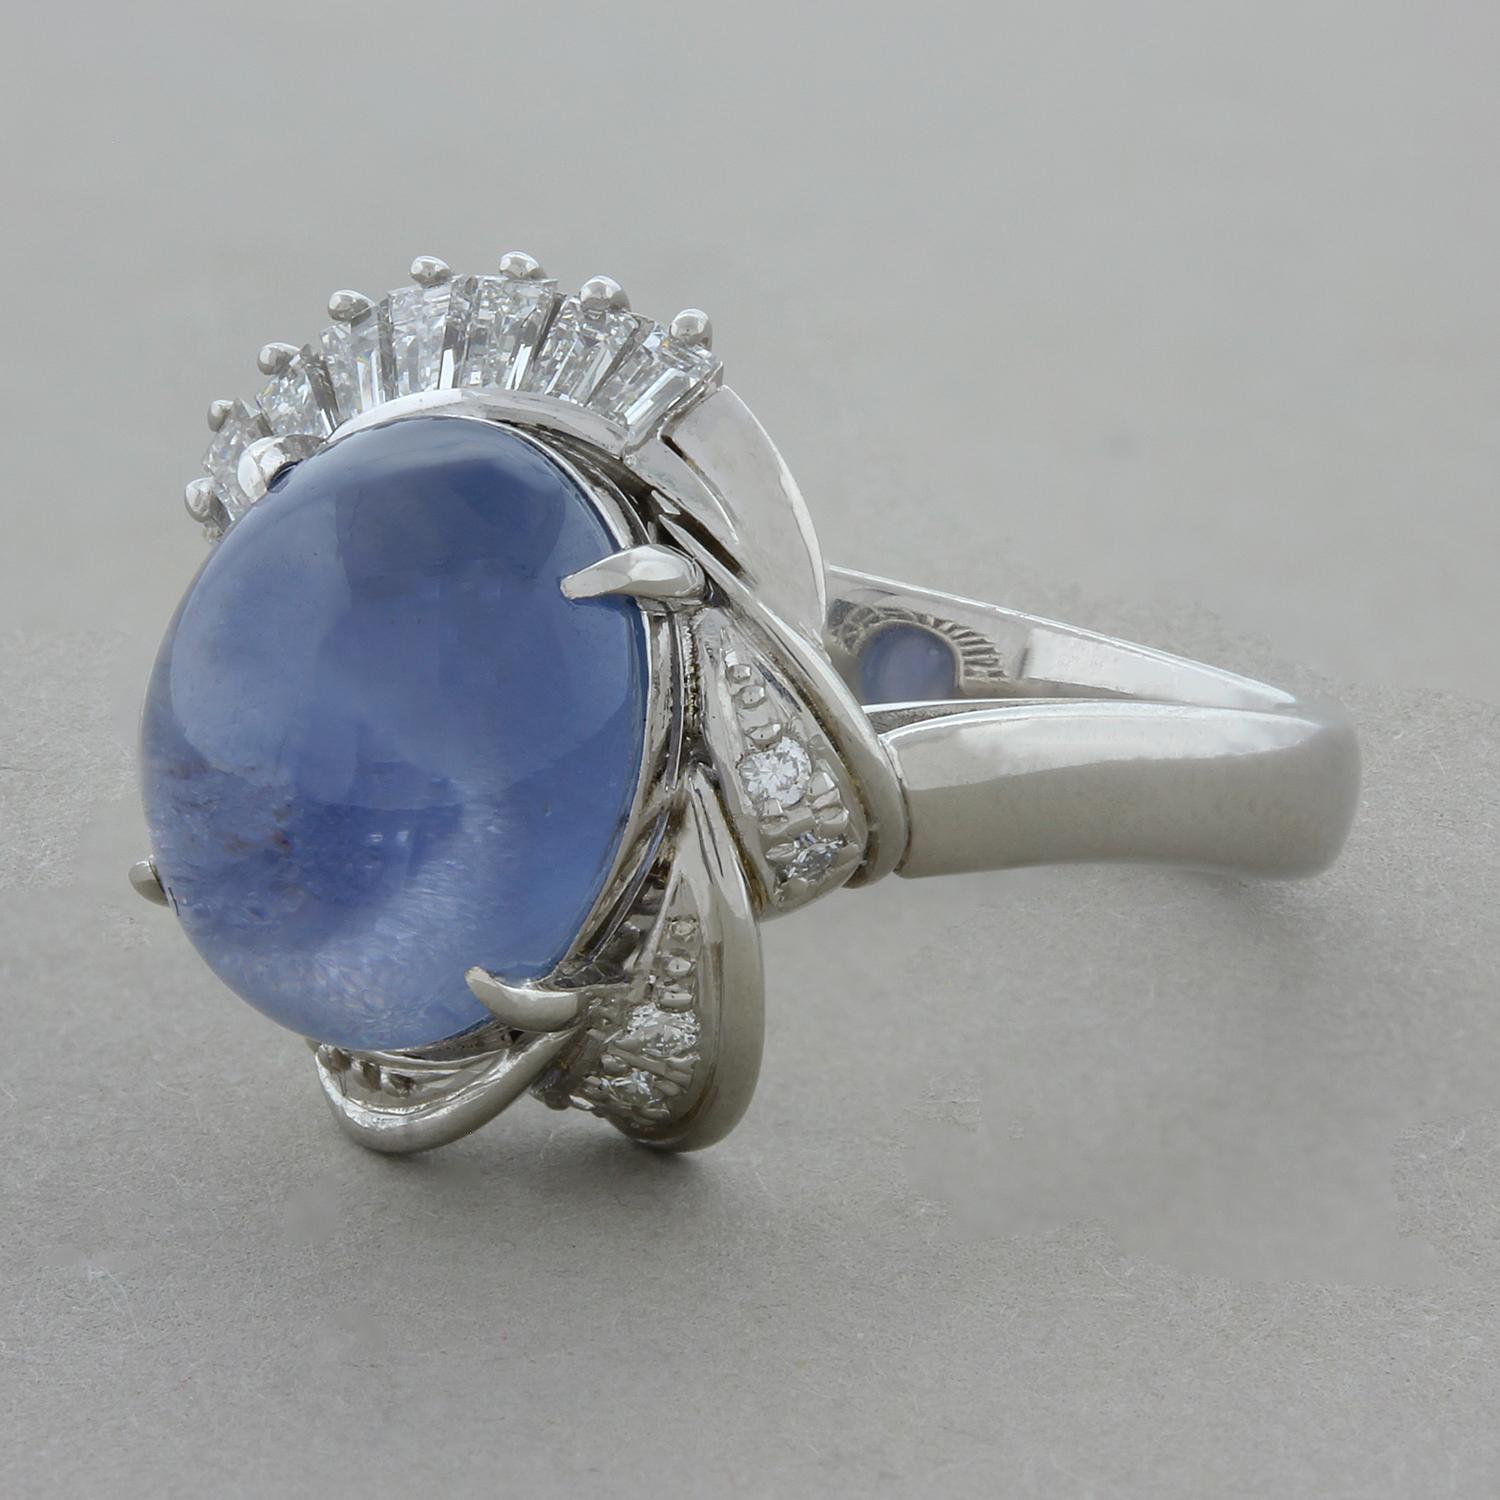 A dazzling platinum ring featuring a 7.64 carat cabochon star sapphire, circa 1960. The blue star sapphire is accented by a platinum twisting halo of 0.36 carats of round and baguette cut diamonds.  

Ring Size 6.75 (Sizable)
